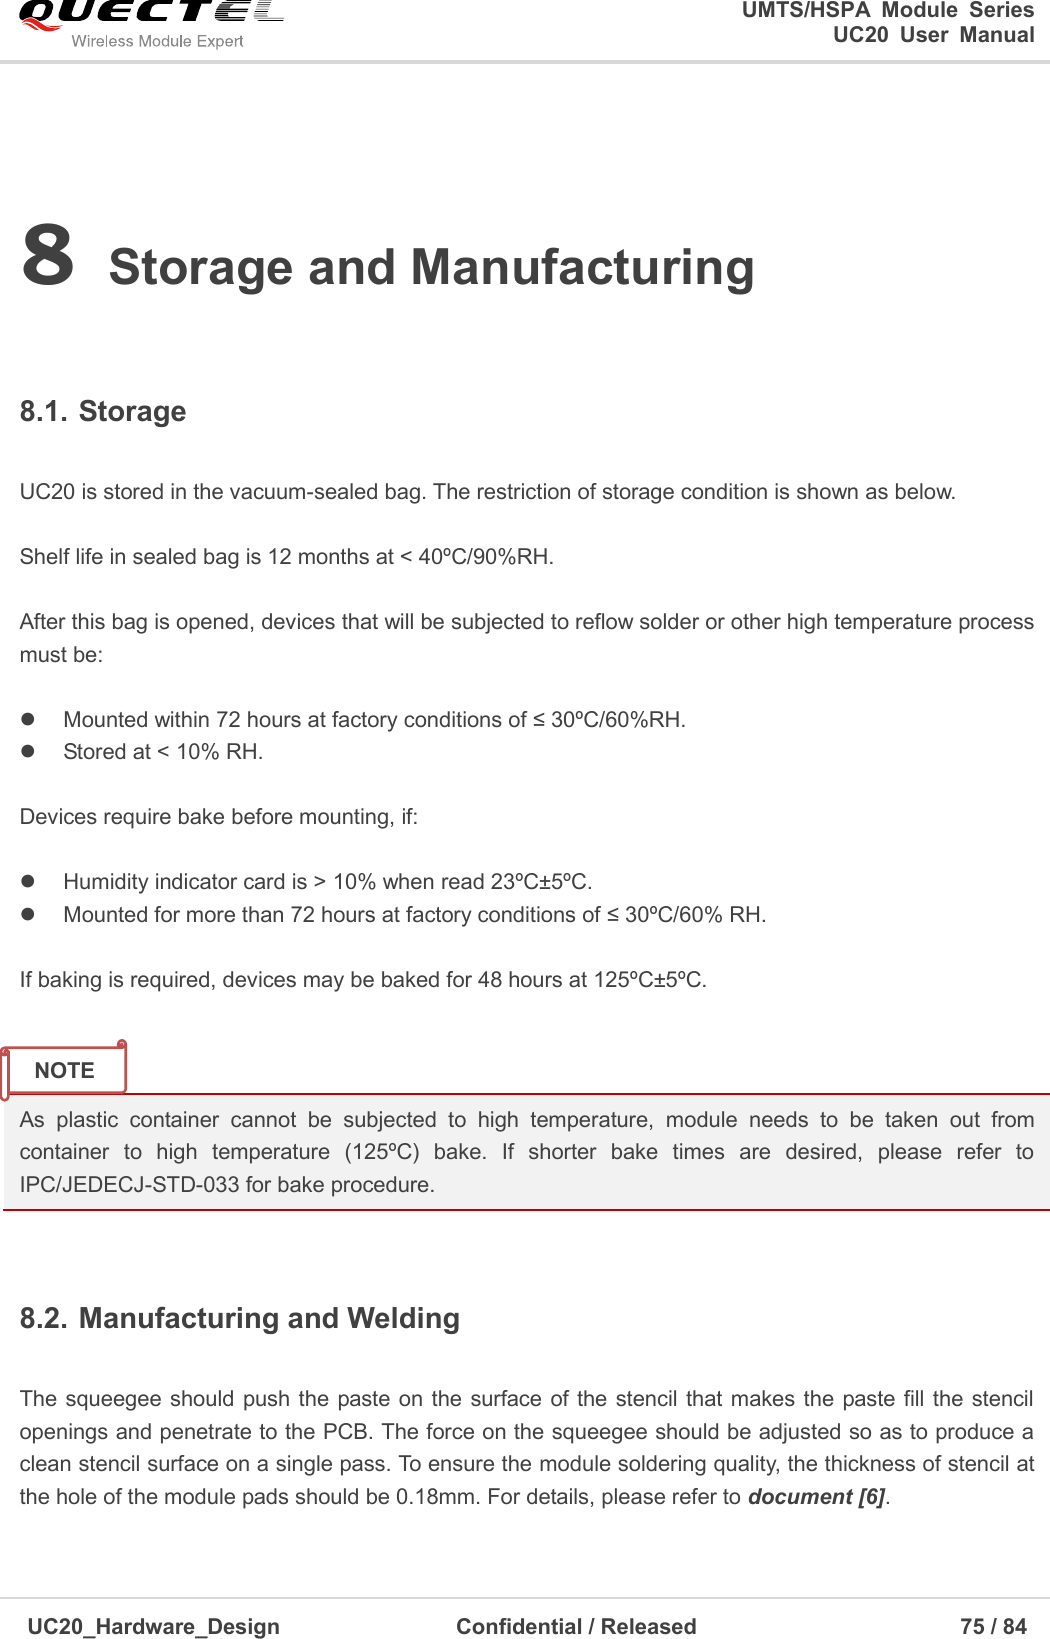                                                                                                                                               UMTS/HSPA  Module  Series                                                                 UC20  User  Manual  UC20_Hardware_Design                  Confidential / Released                            75 / 84     8 Storage and Manufacturing  8.1. Storage  UC20 is stored in the vacuum-sealed bag. The restriction of storage condition is shown as below.    Shelf life in sealed bag is 12 months at &lt; 40ºC/90%RH.    After this bag is opened, devices that will be subjected to reflow solder or other high temperature process must be:    Mounted within 72 hours at factory conditions of ≤ 30ºC/60%RH.   Stored at &lt; 10% RH.  Devices require bake before mounting, if:    Humidity indicator card is &gt; 10% when read 23ºC±5ºC.   Mounted for more than 72 hours at factory conditions of ≤ 30ºC/60% RH.  If baking is required, devices may be baked for 48 hours at 125ºC±5ºC.   As  plastic  container  cannot  be  subjected  to  high  temperature,  module  needs  to  be  taken  out  from container  to  high  temperature  (125ºC)  bake.  If  shorter  bake  times  are  desired,  please  refer  to IPC/JEDECJ-STD-033 for bake procedure.  8.2. Manufacturing and Welding  The squeegee should push the paste on  the surface of the  stencil that makes the paste fill the stencil openings and penetrate to the PCB. The force on the squeegee should be adjusted so as to produce a clean stencil surface on a single pass. To ensure the module soldering quality, the thickness of stencil at the hole of the module pads should be 0.18mm. For details, please refer to document [6].  NOTE 